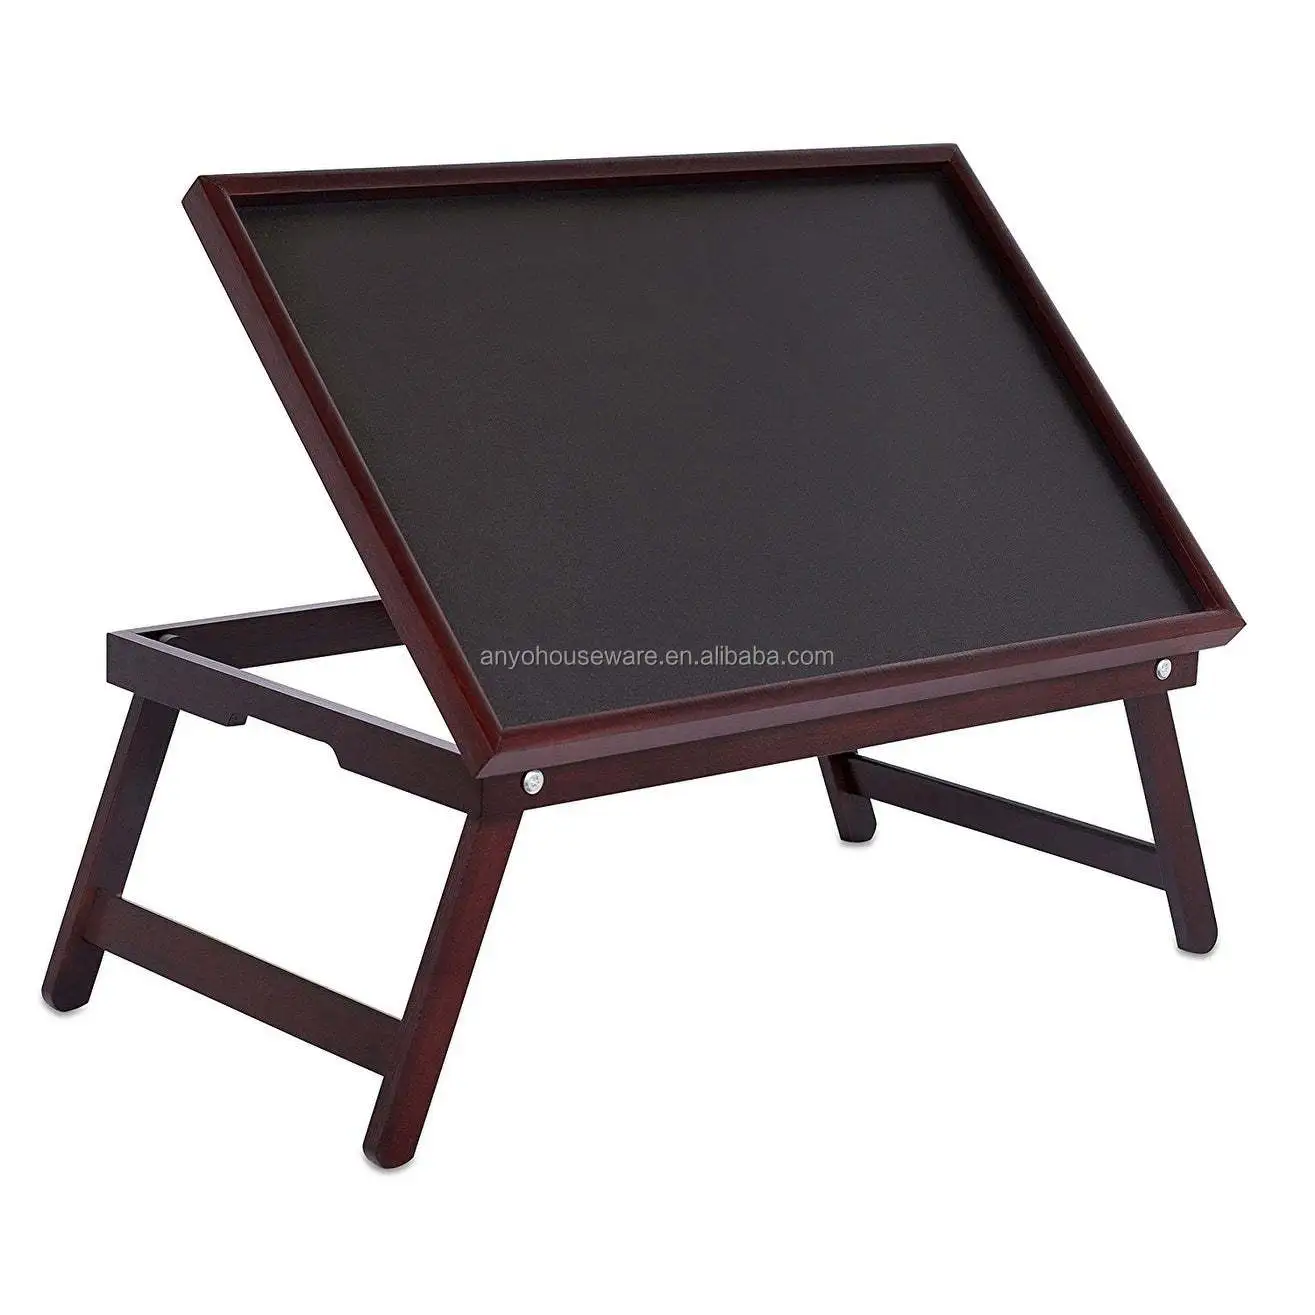 Home Bamboo Walnut Foldable Breakfast Serving Bed Tray Laptop Stand Computer Desk